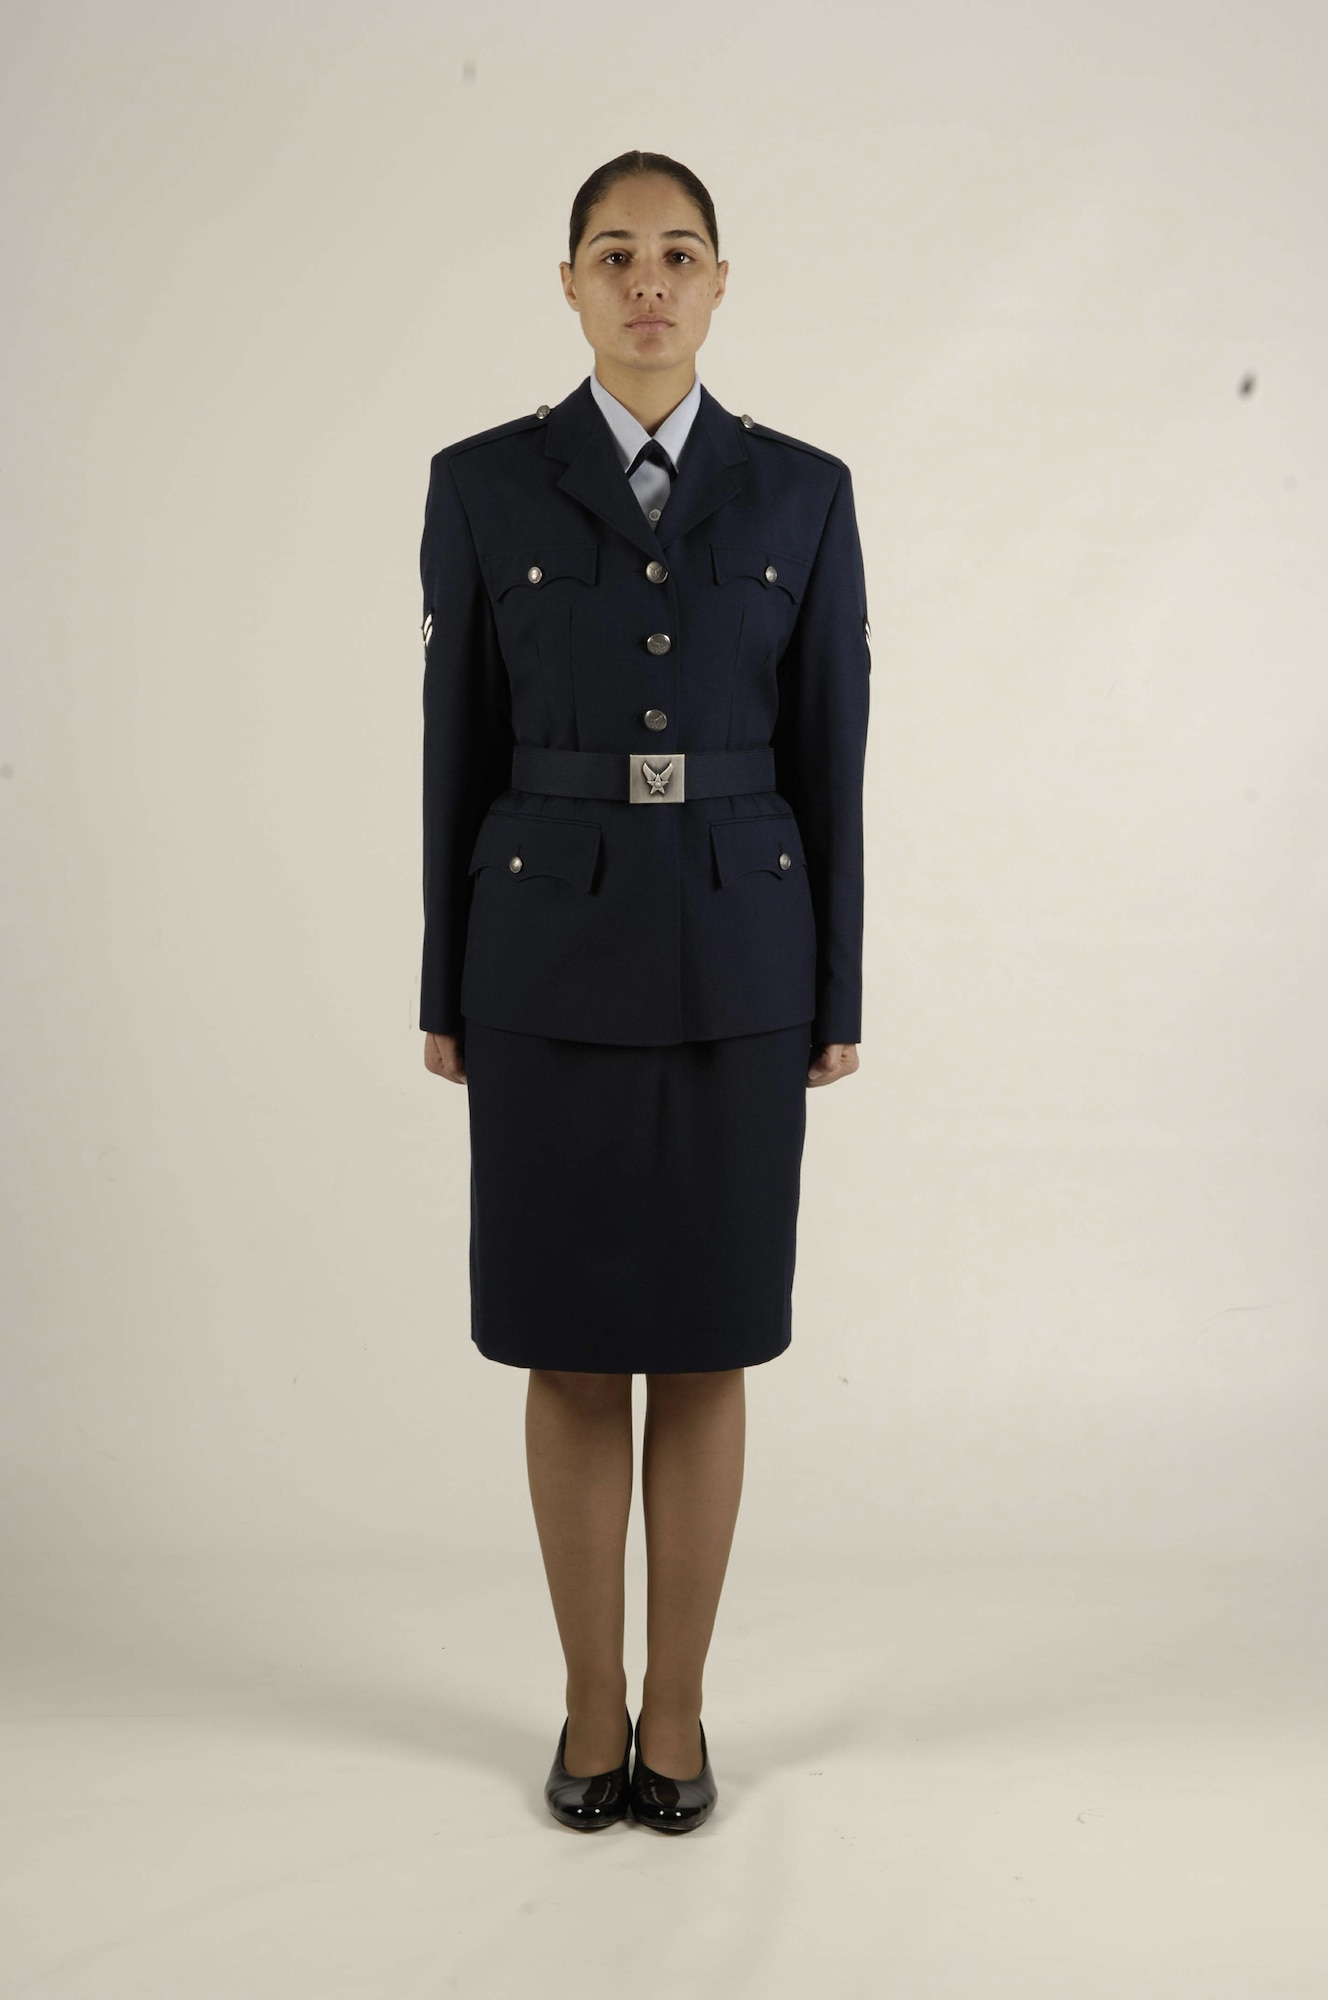 Officer and enlisted male and female participants wear-tested three variant issue designs of the proposed Heritage Coat. The differences between the coats were a fabric belt and slide buckle, the honor guard style belt and buckle, and the four-button, no belt style. (U.S. Air Force photo)